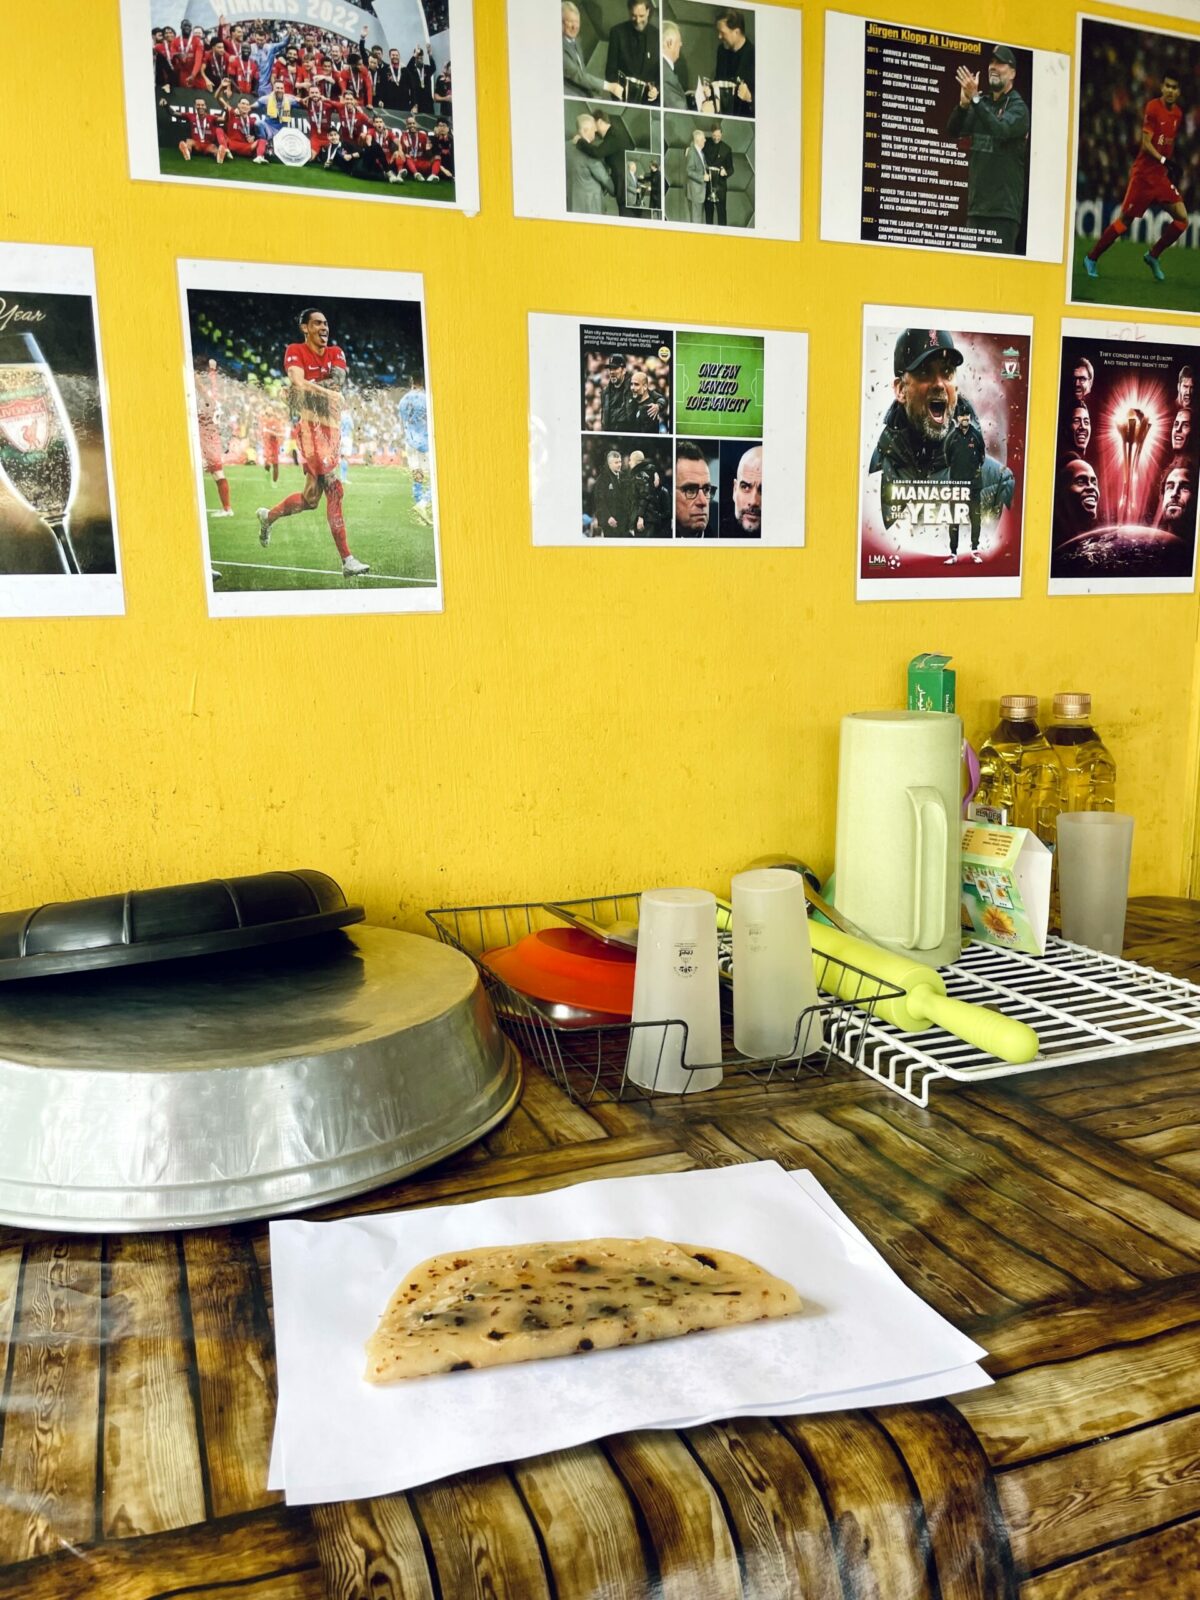 Folded Mauritian roti on white paper and table with soccer posters on wall and utensils drying on rack - SKB Roti vendor Port Louis.